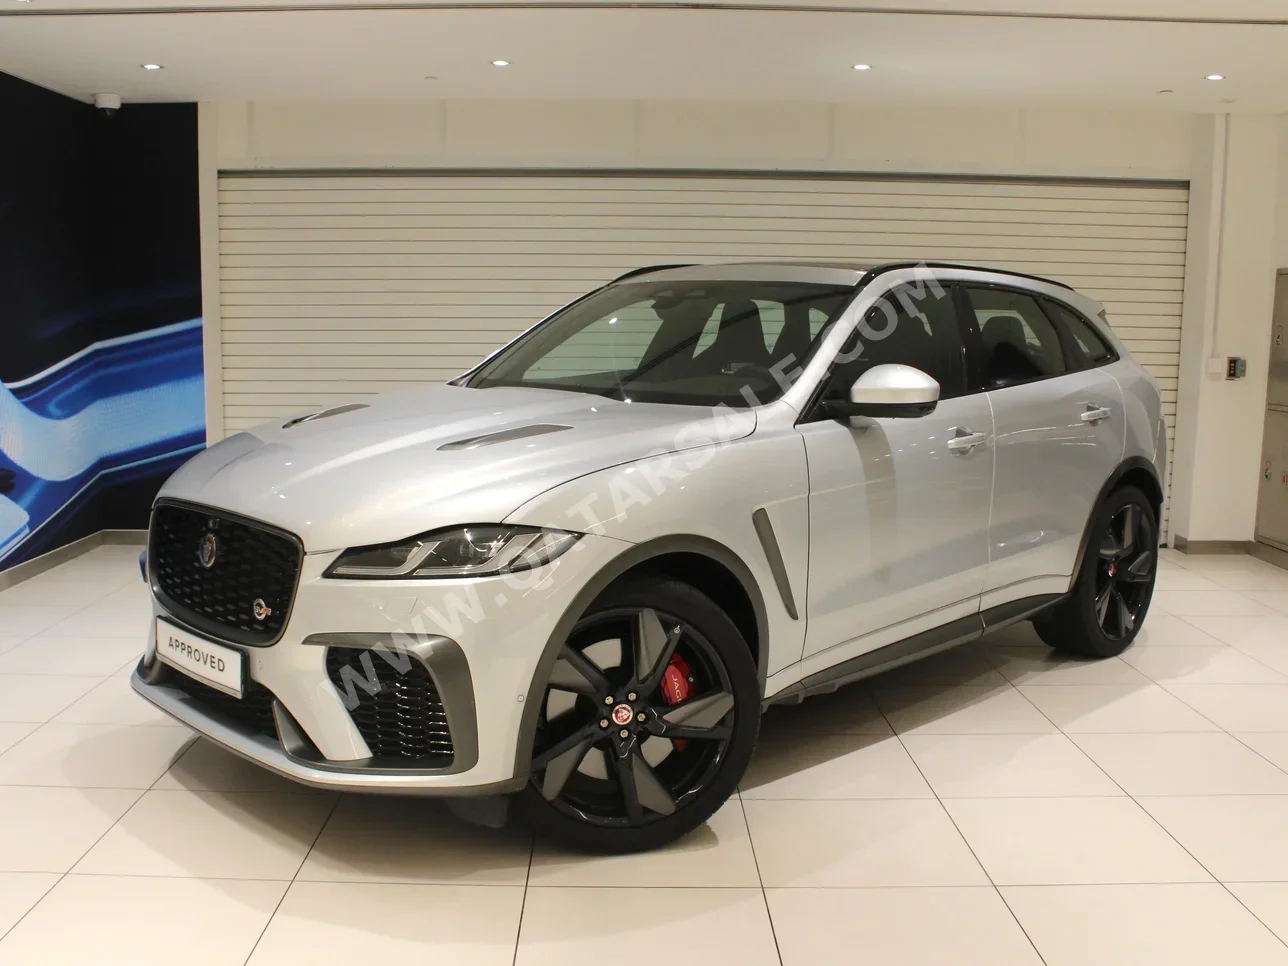 Jaguar  F-Pace  SVR  2022  Automatic  36,000 Km  8 Cylinder  Four Wheel Drive (4WD)  SUV  Silver  With Warranty